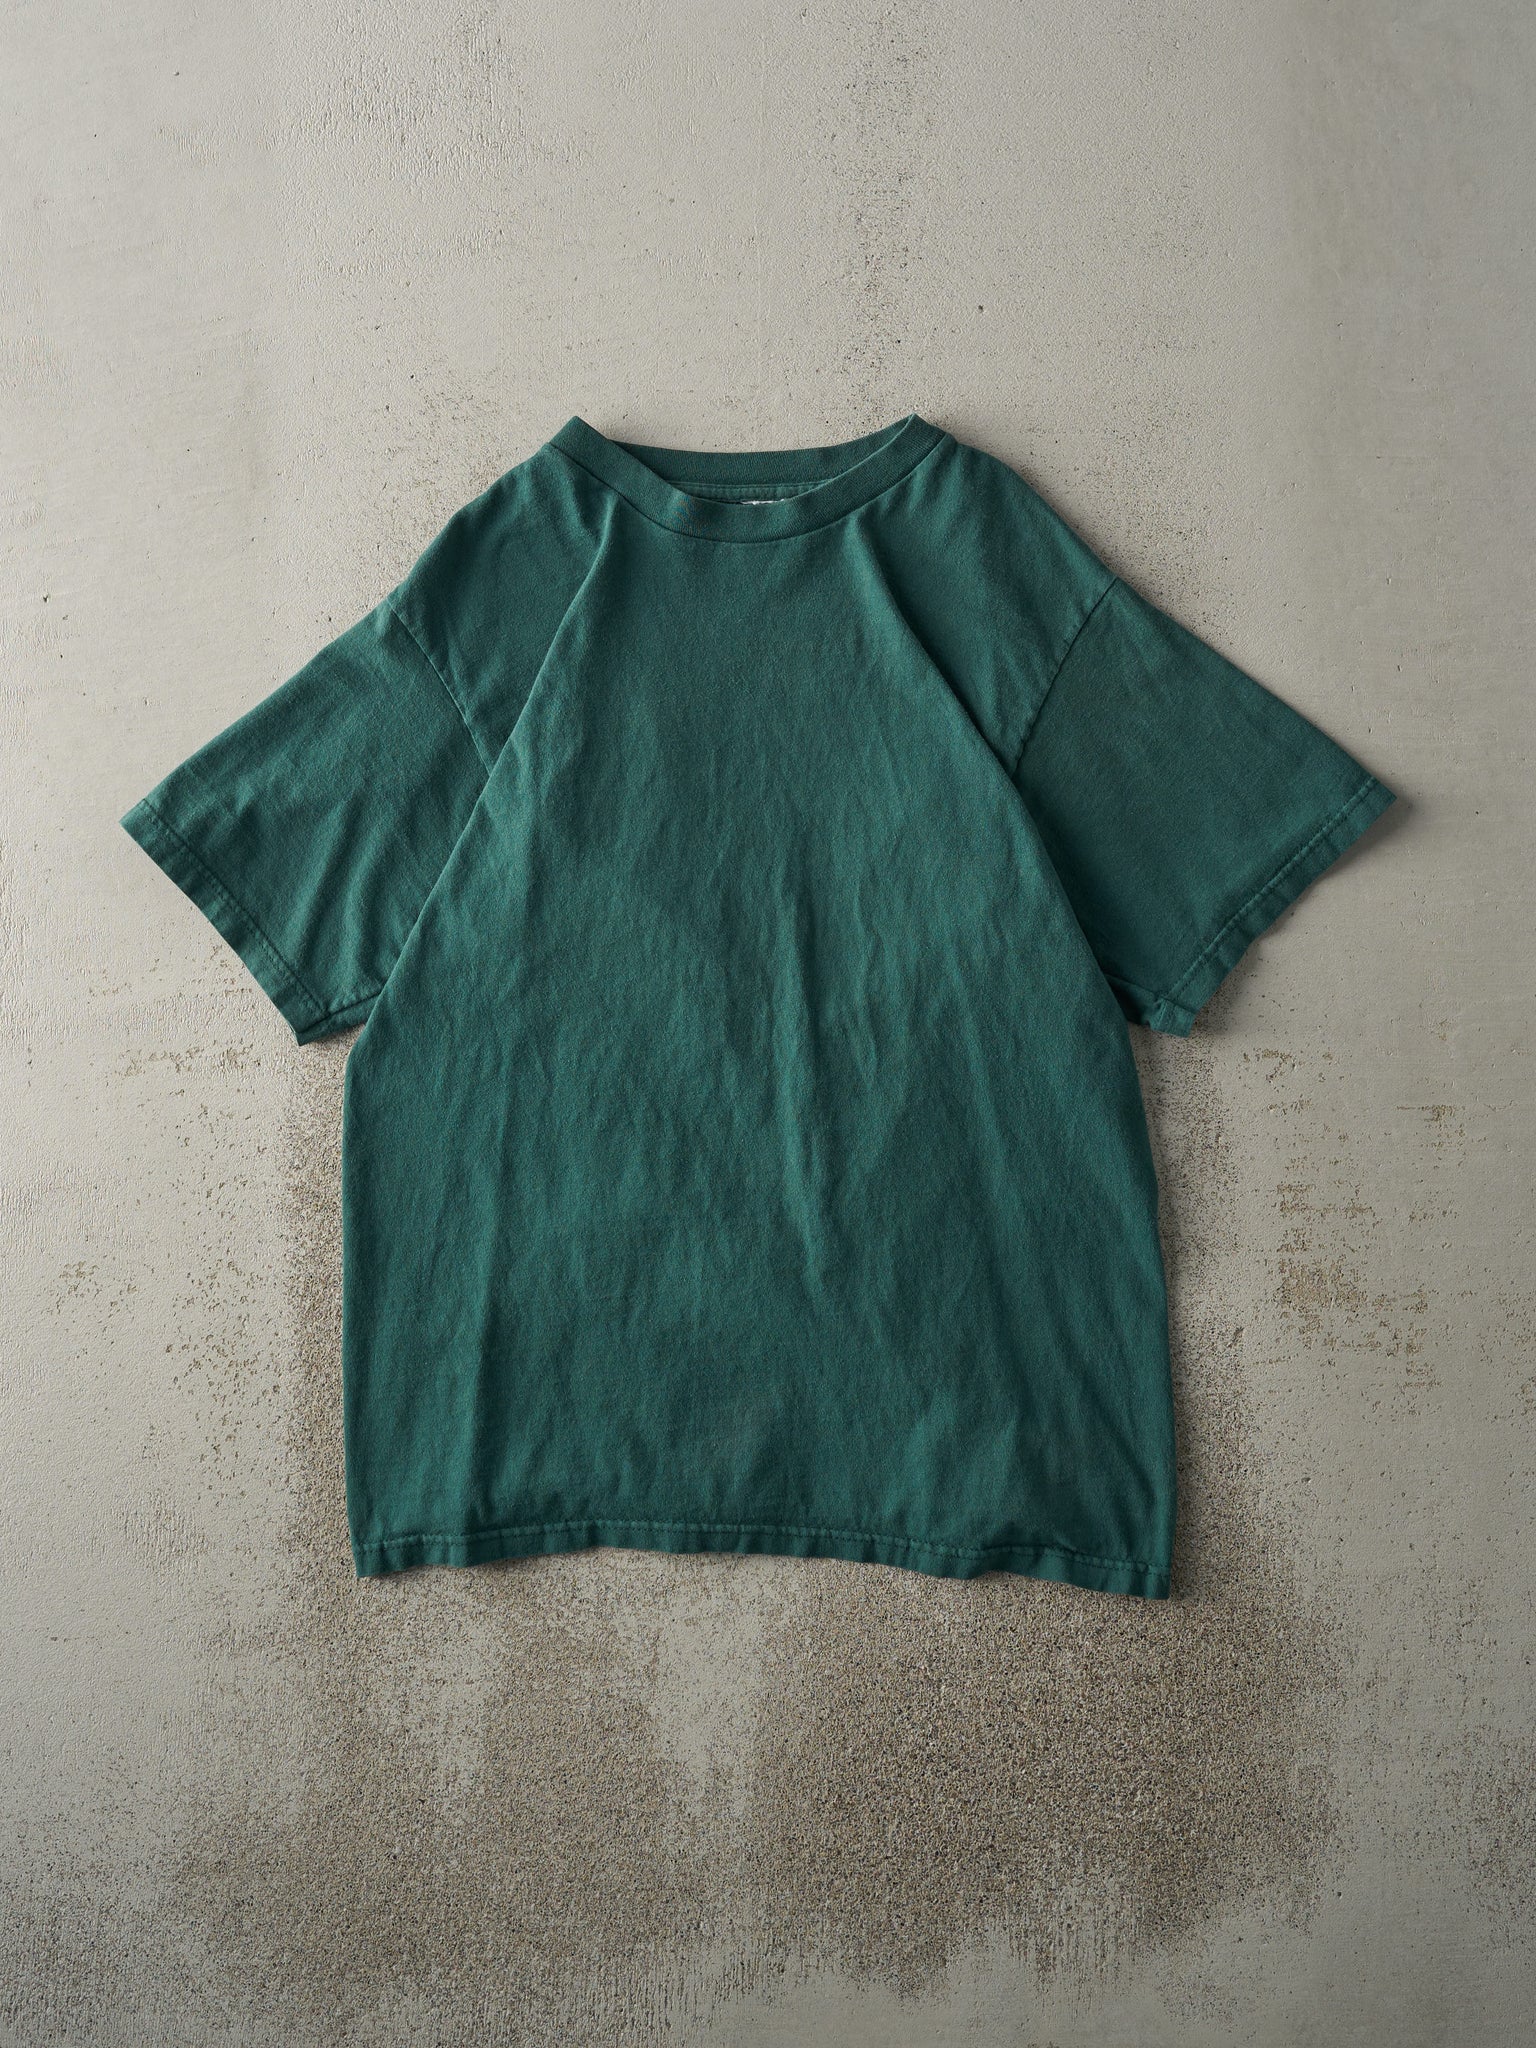 Vintage 90s Forest Green Blank Tee (M)